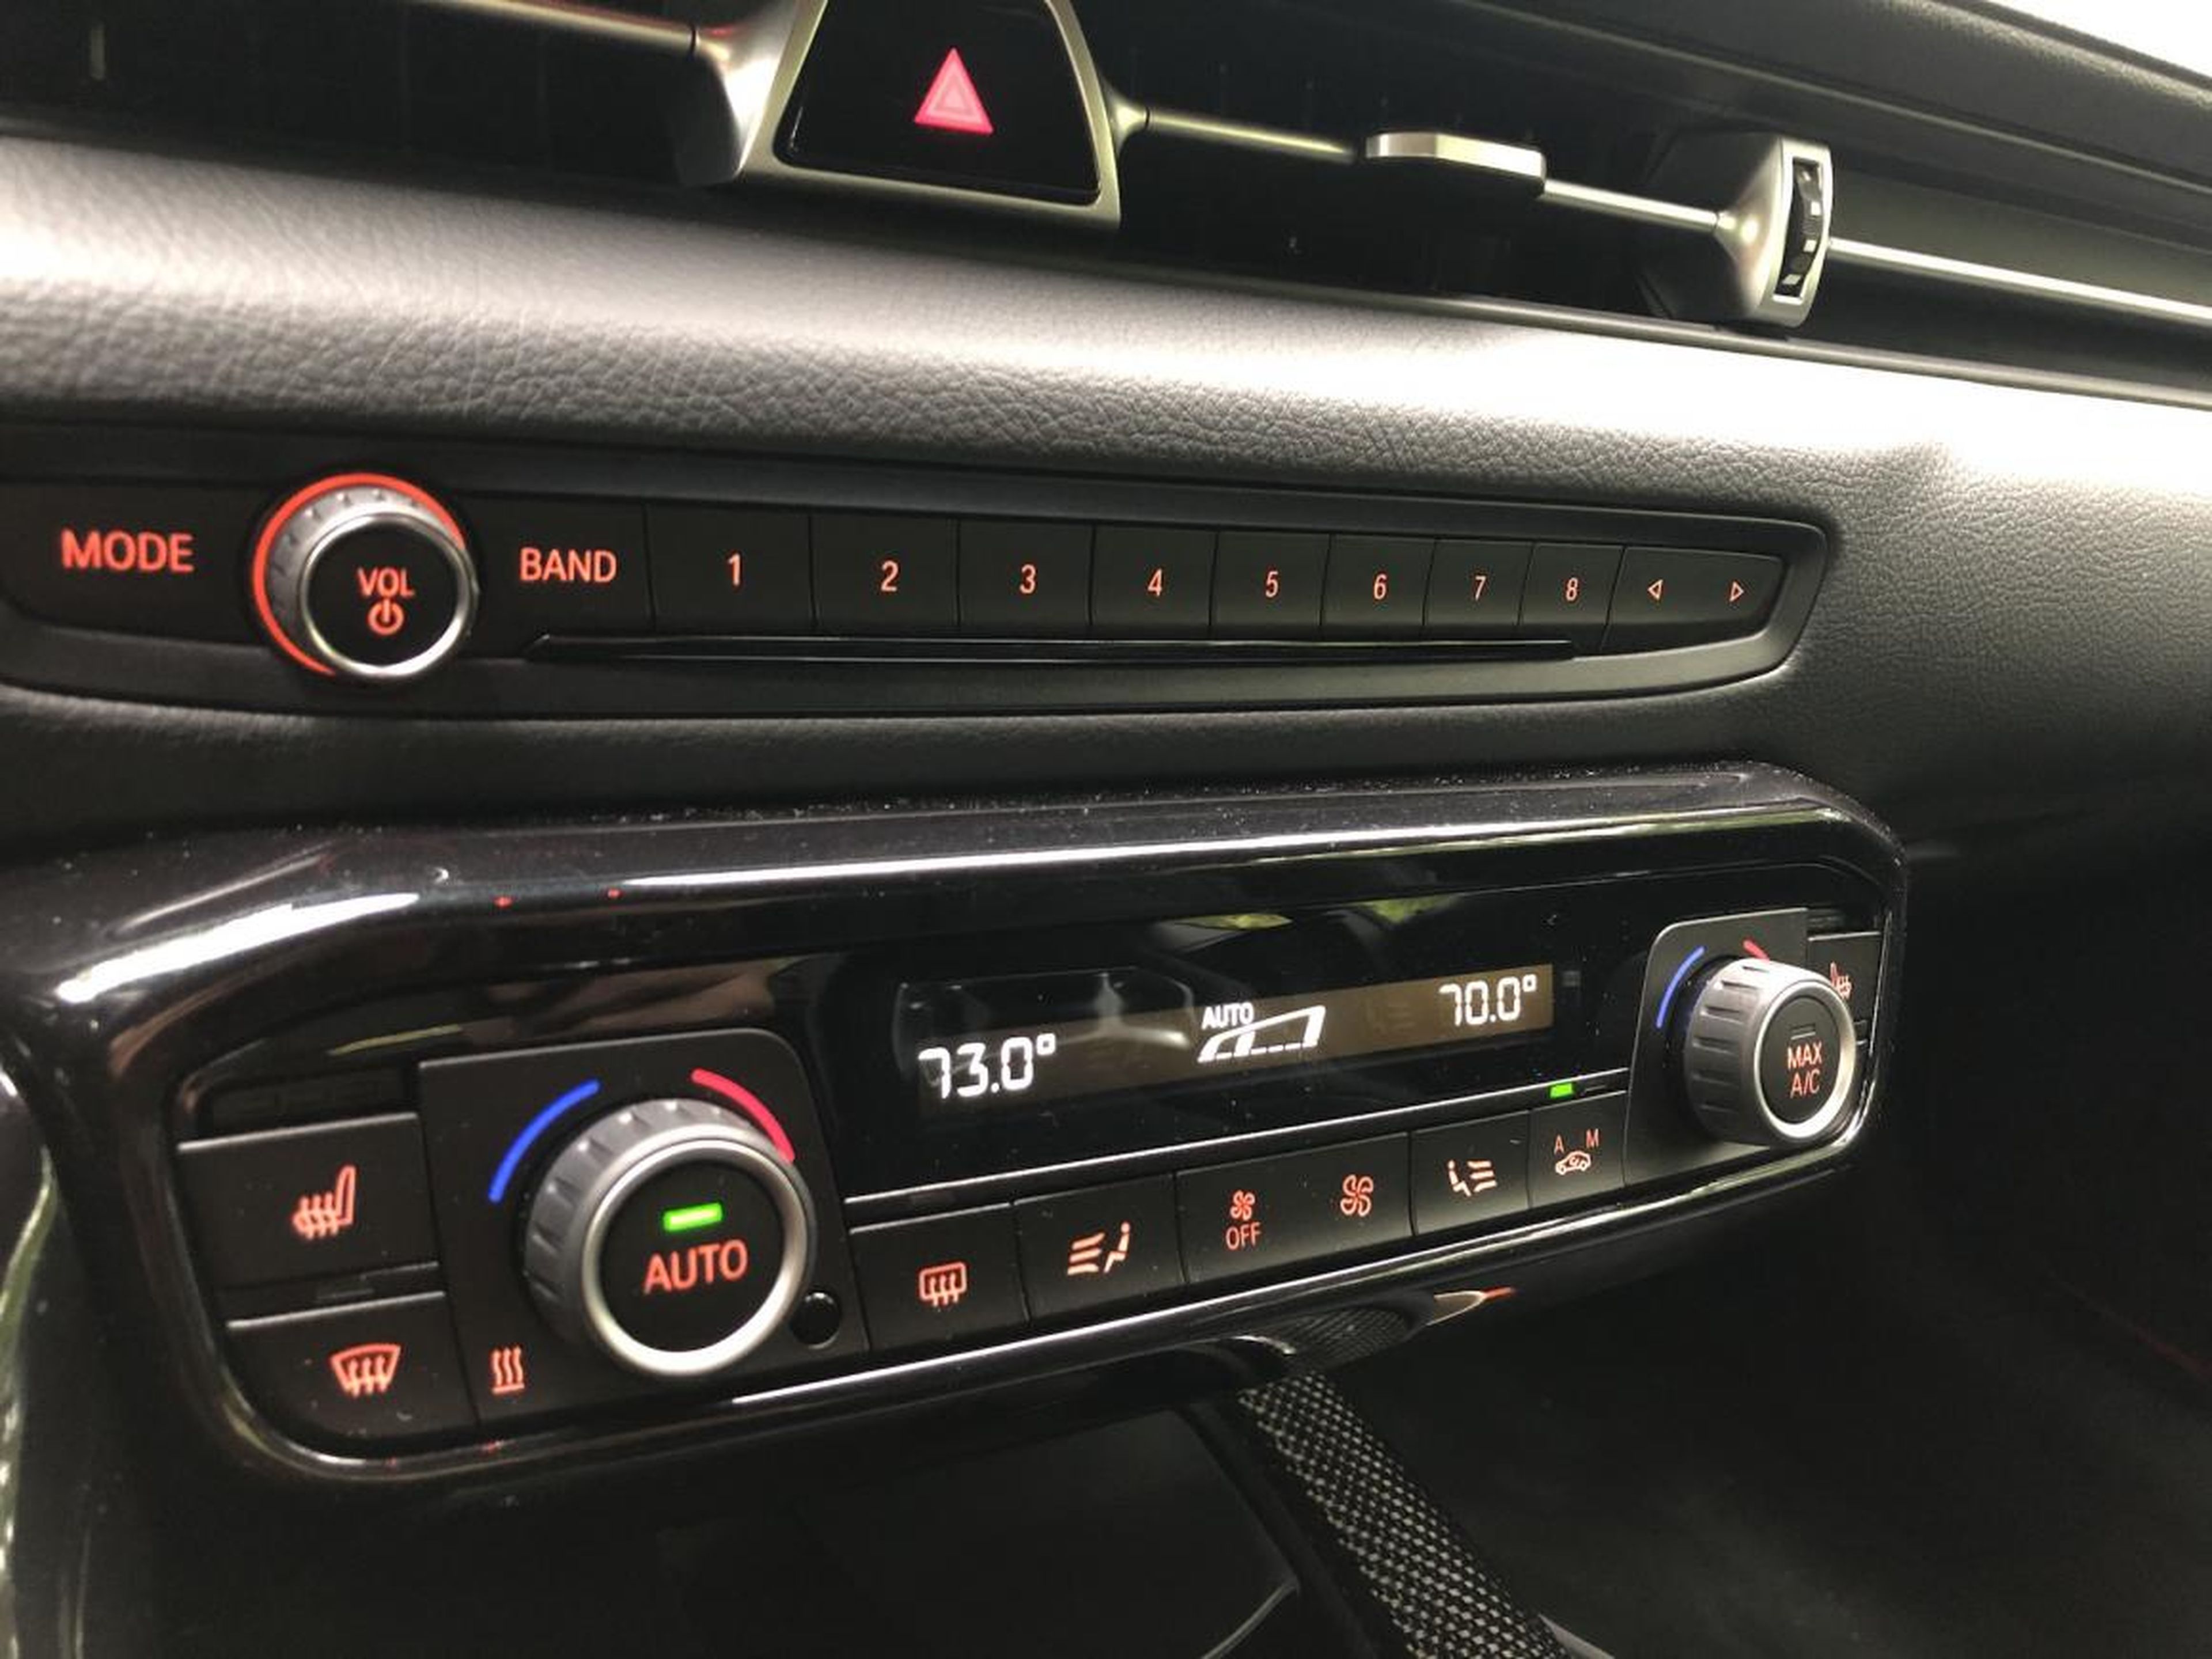 The climate controls are exactly the same as the Z4, but they're also intuitive to use.